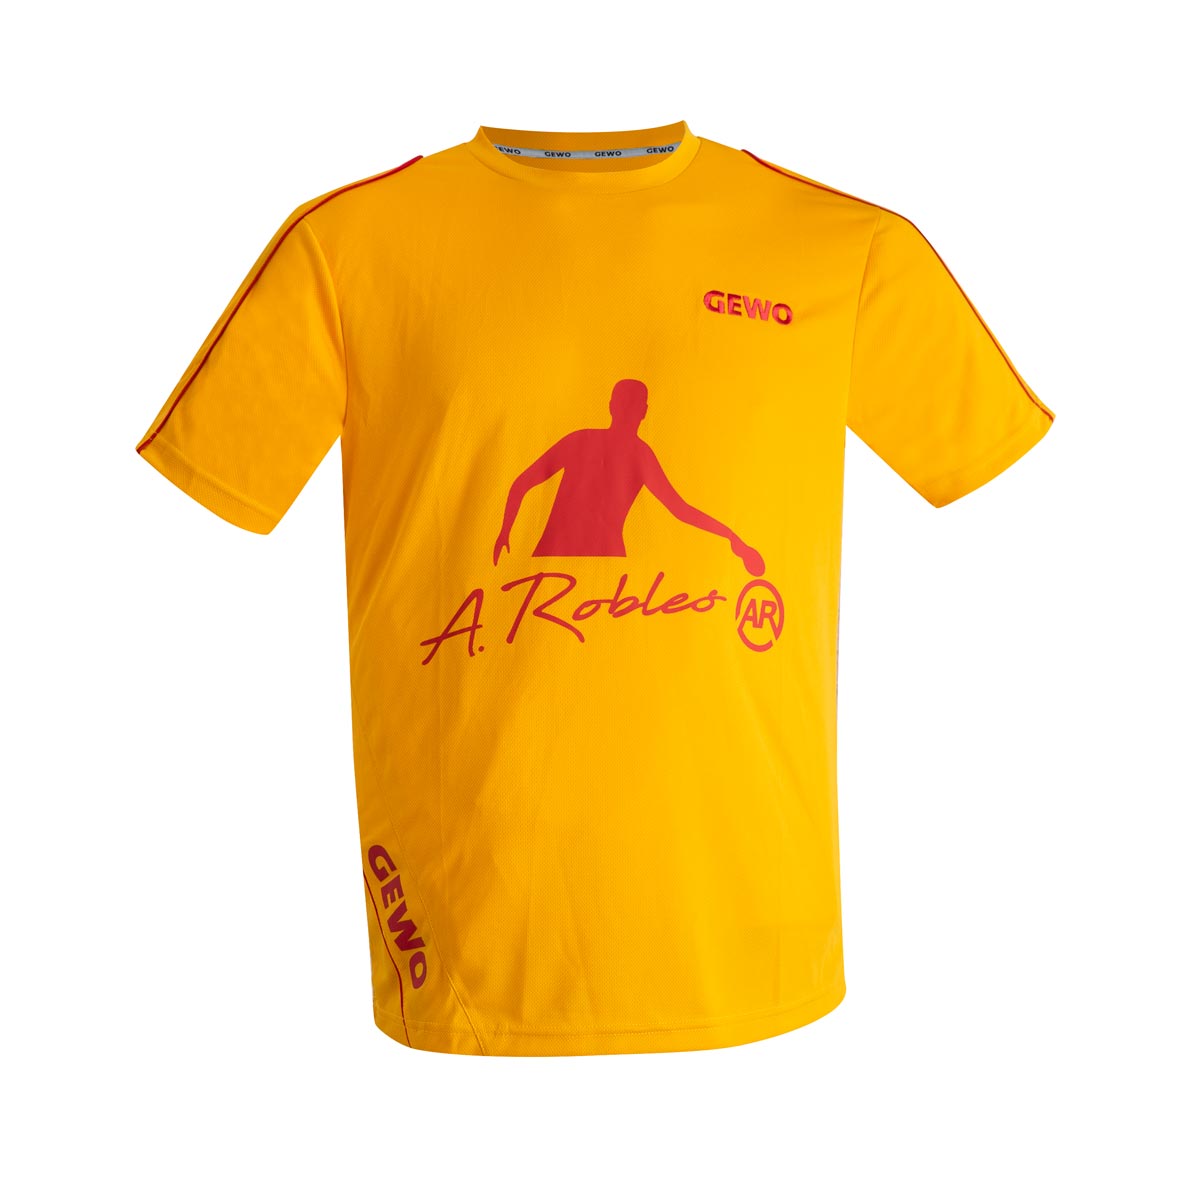 GEWO T-Shirt Promotion Robles gelb/rot XL